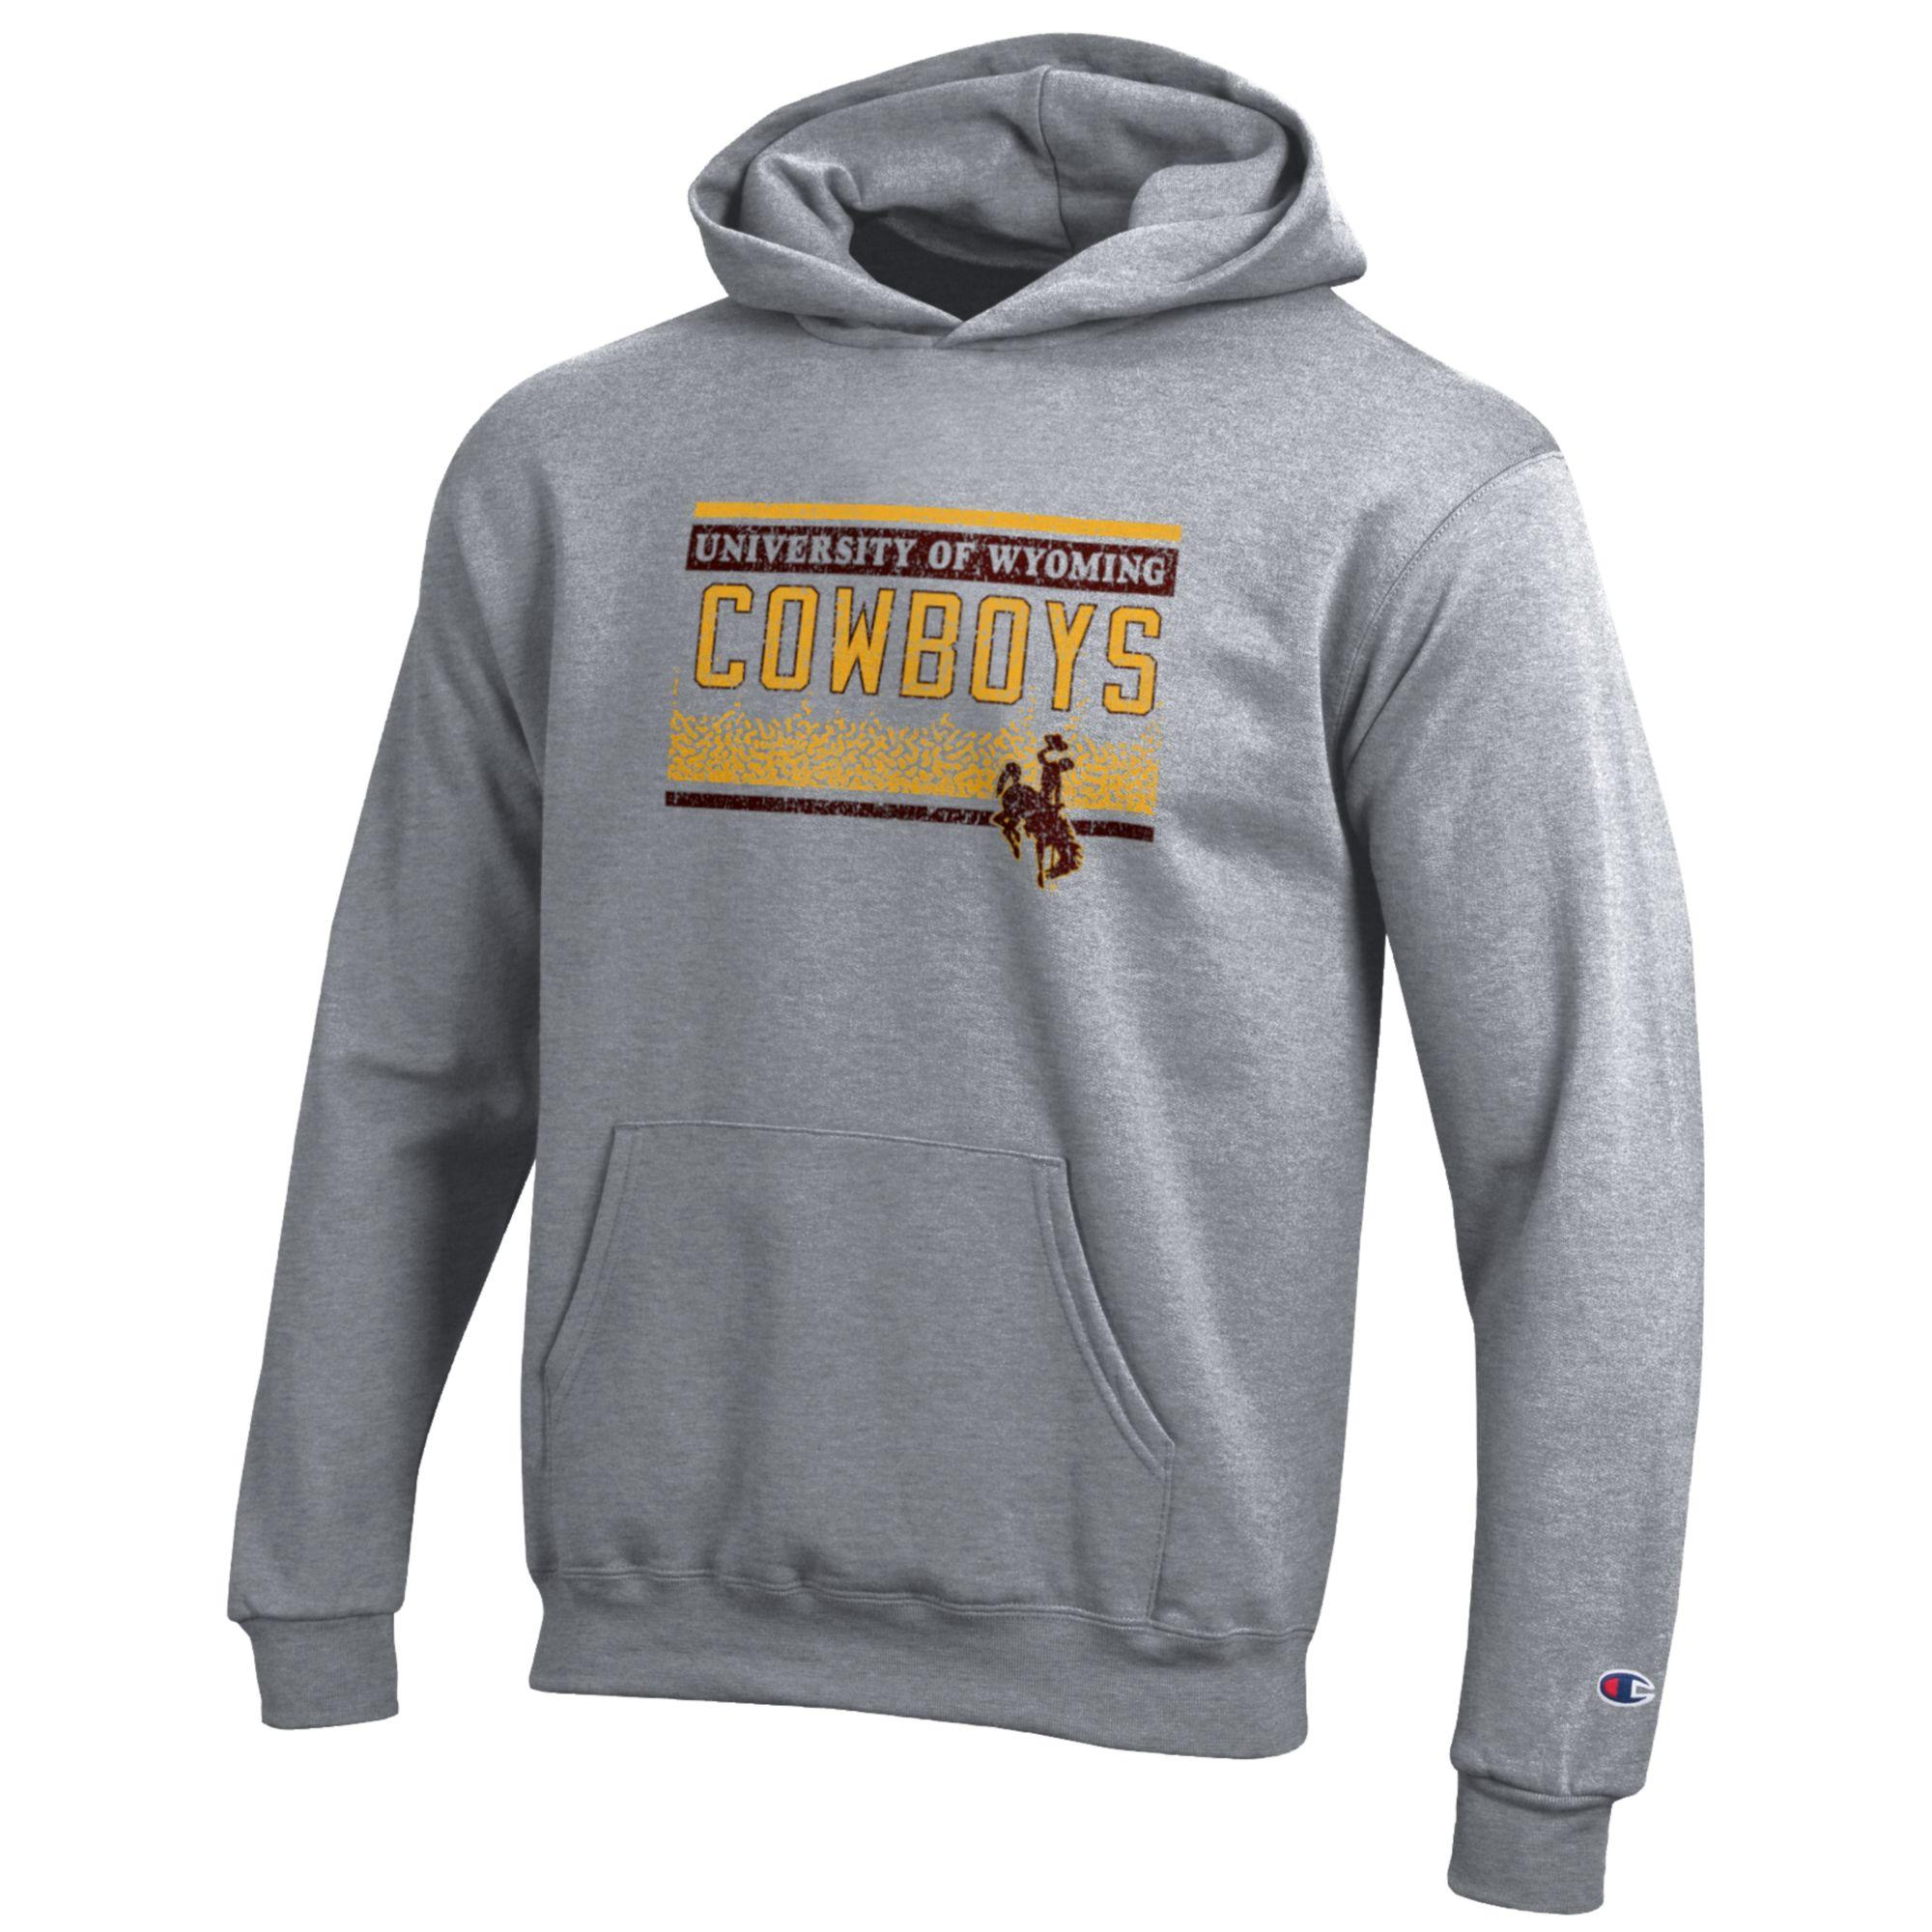 Youth grey hooded sweatshirt with design on front.Gold and brown bars at bottom and top of design with University of wyoming in gold between.